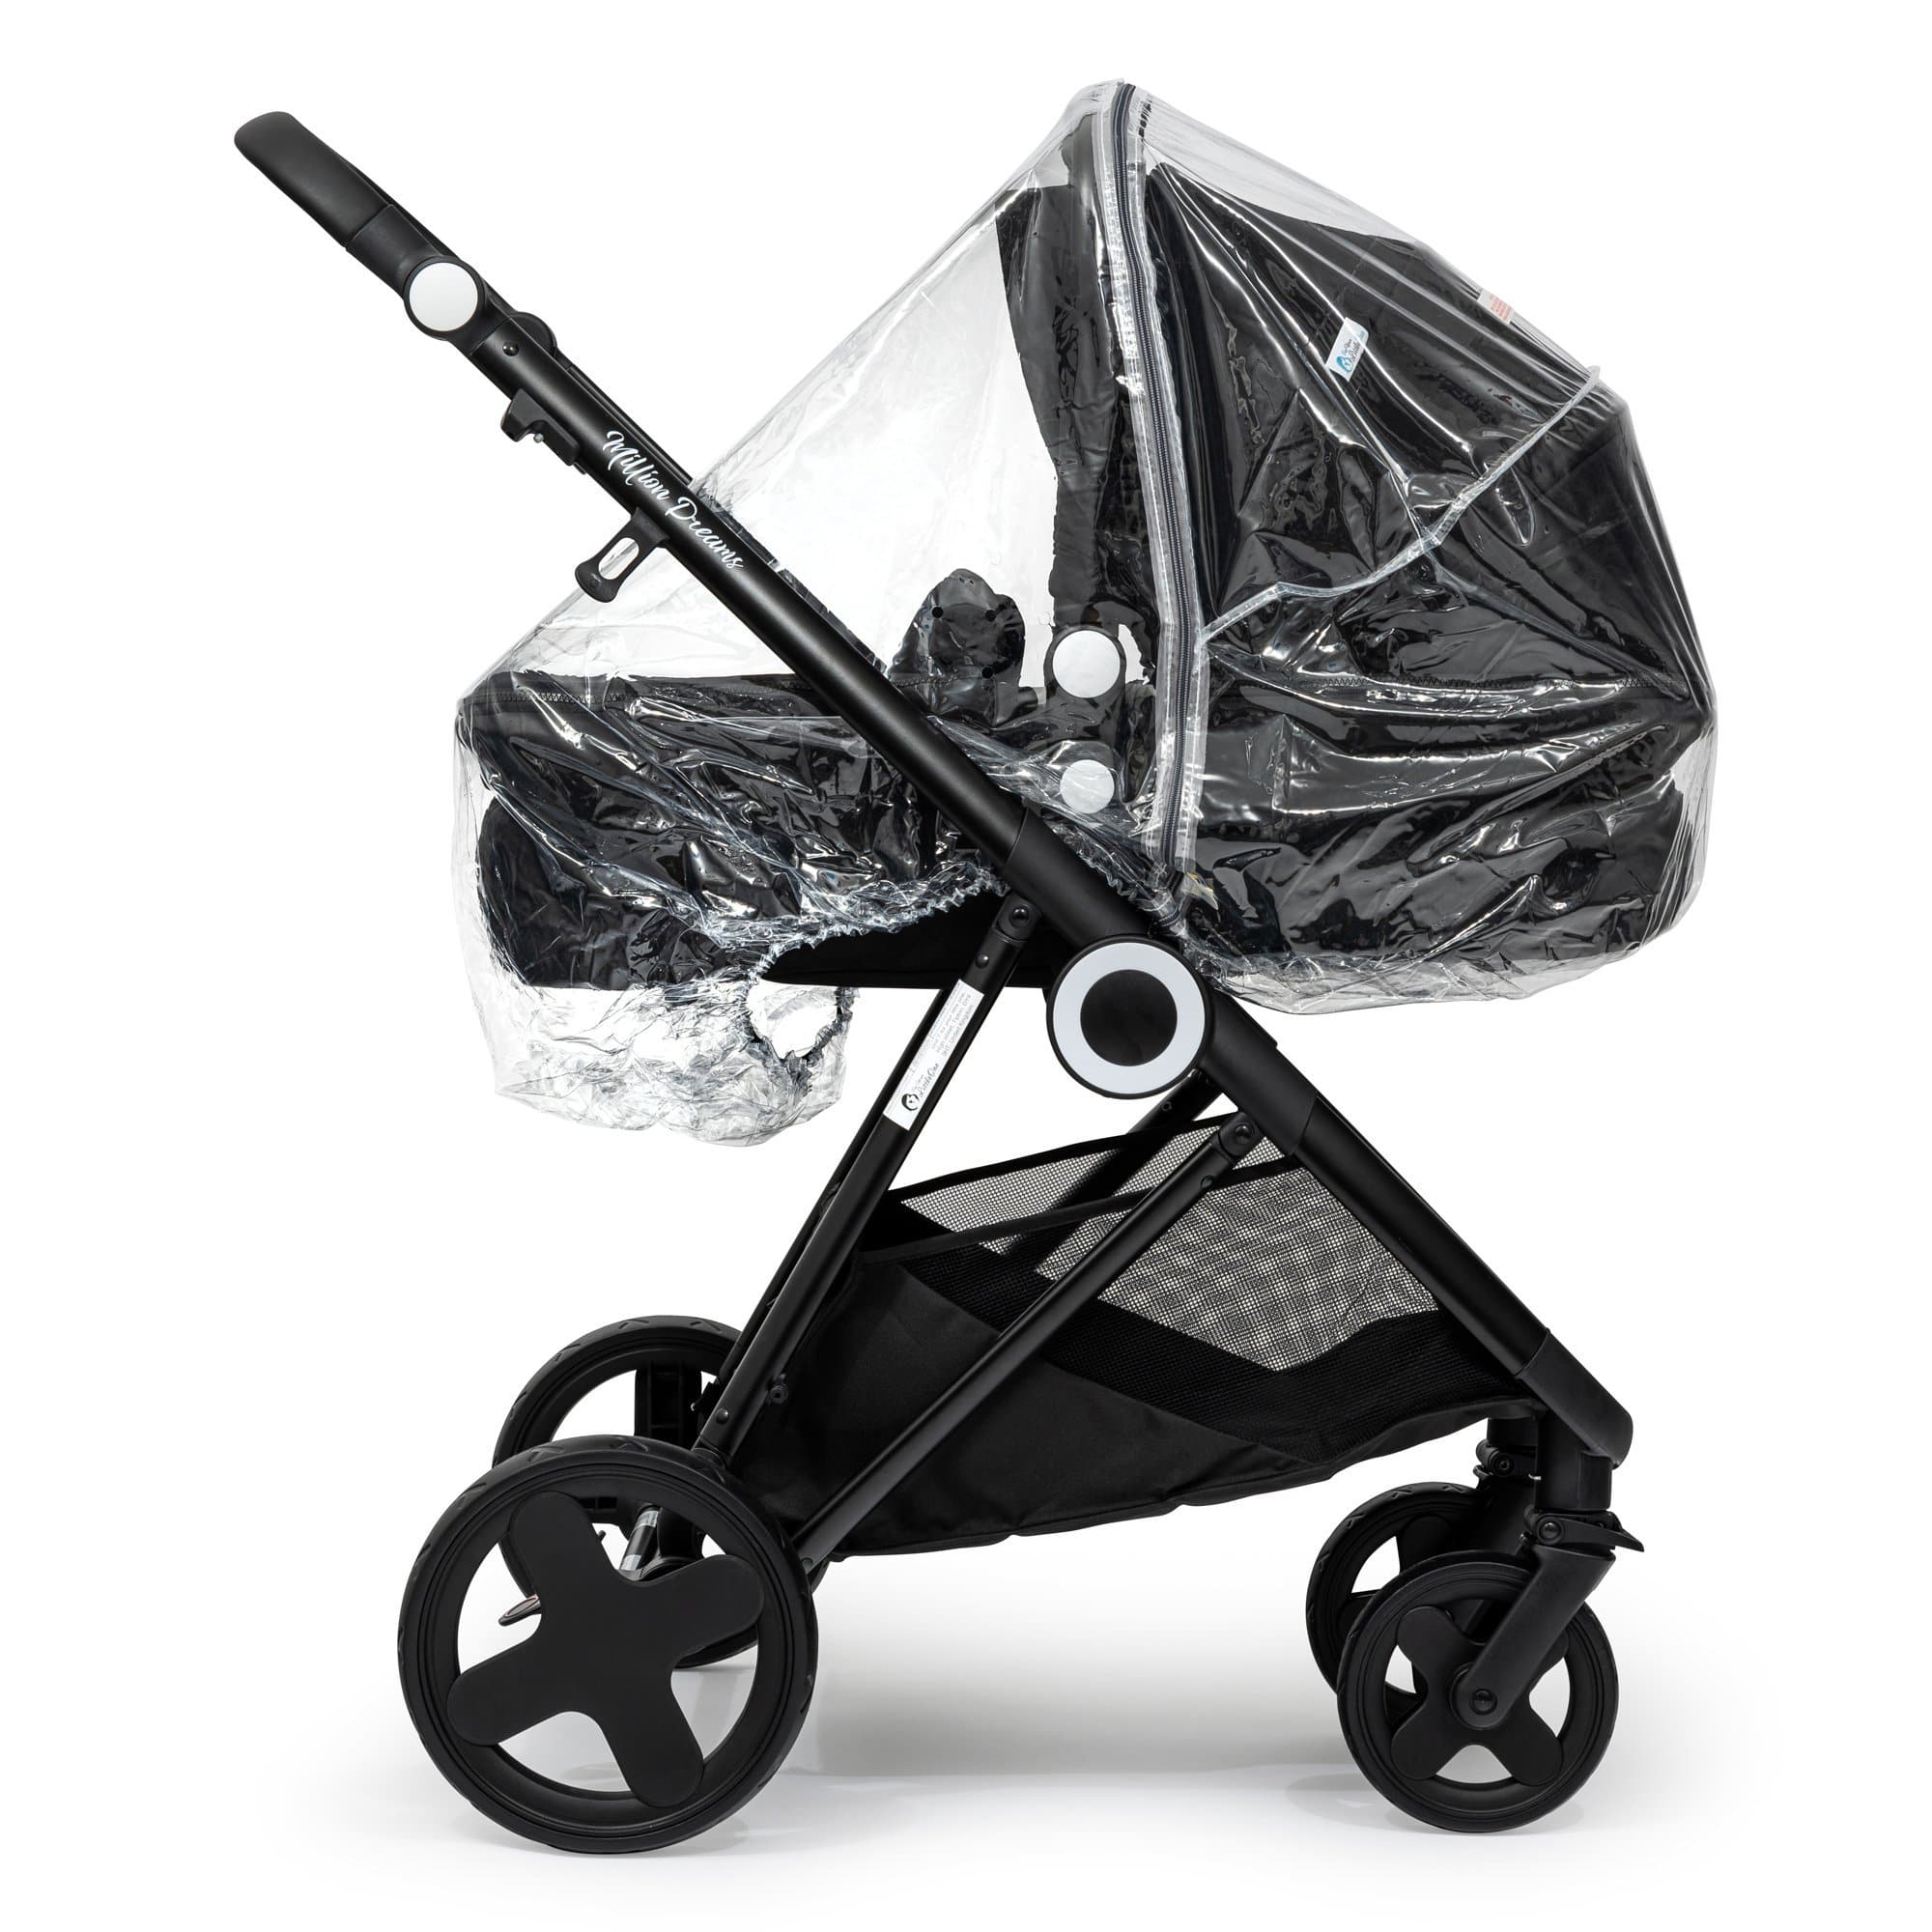 2 in 1 Rain Cover Compatible with Hybrid - Fits All Models - For Your Little One